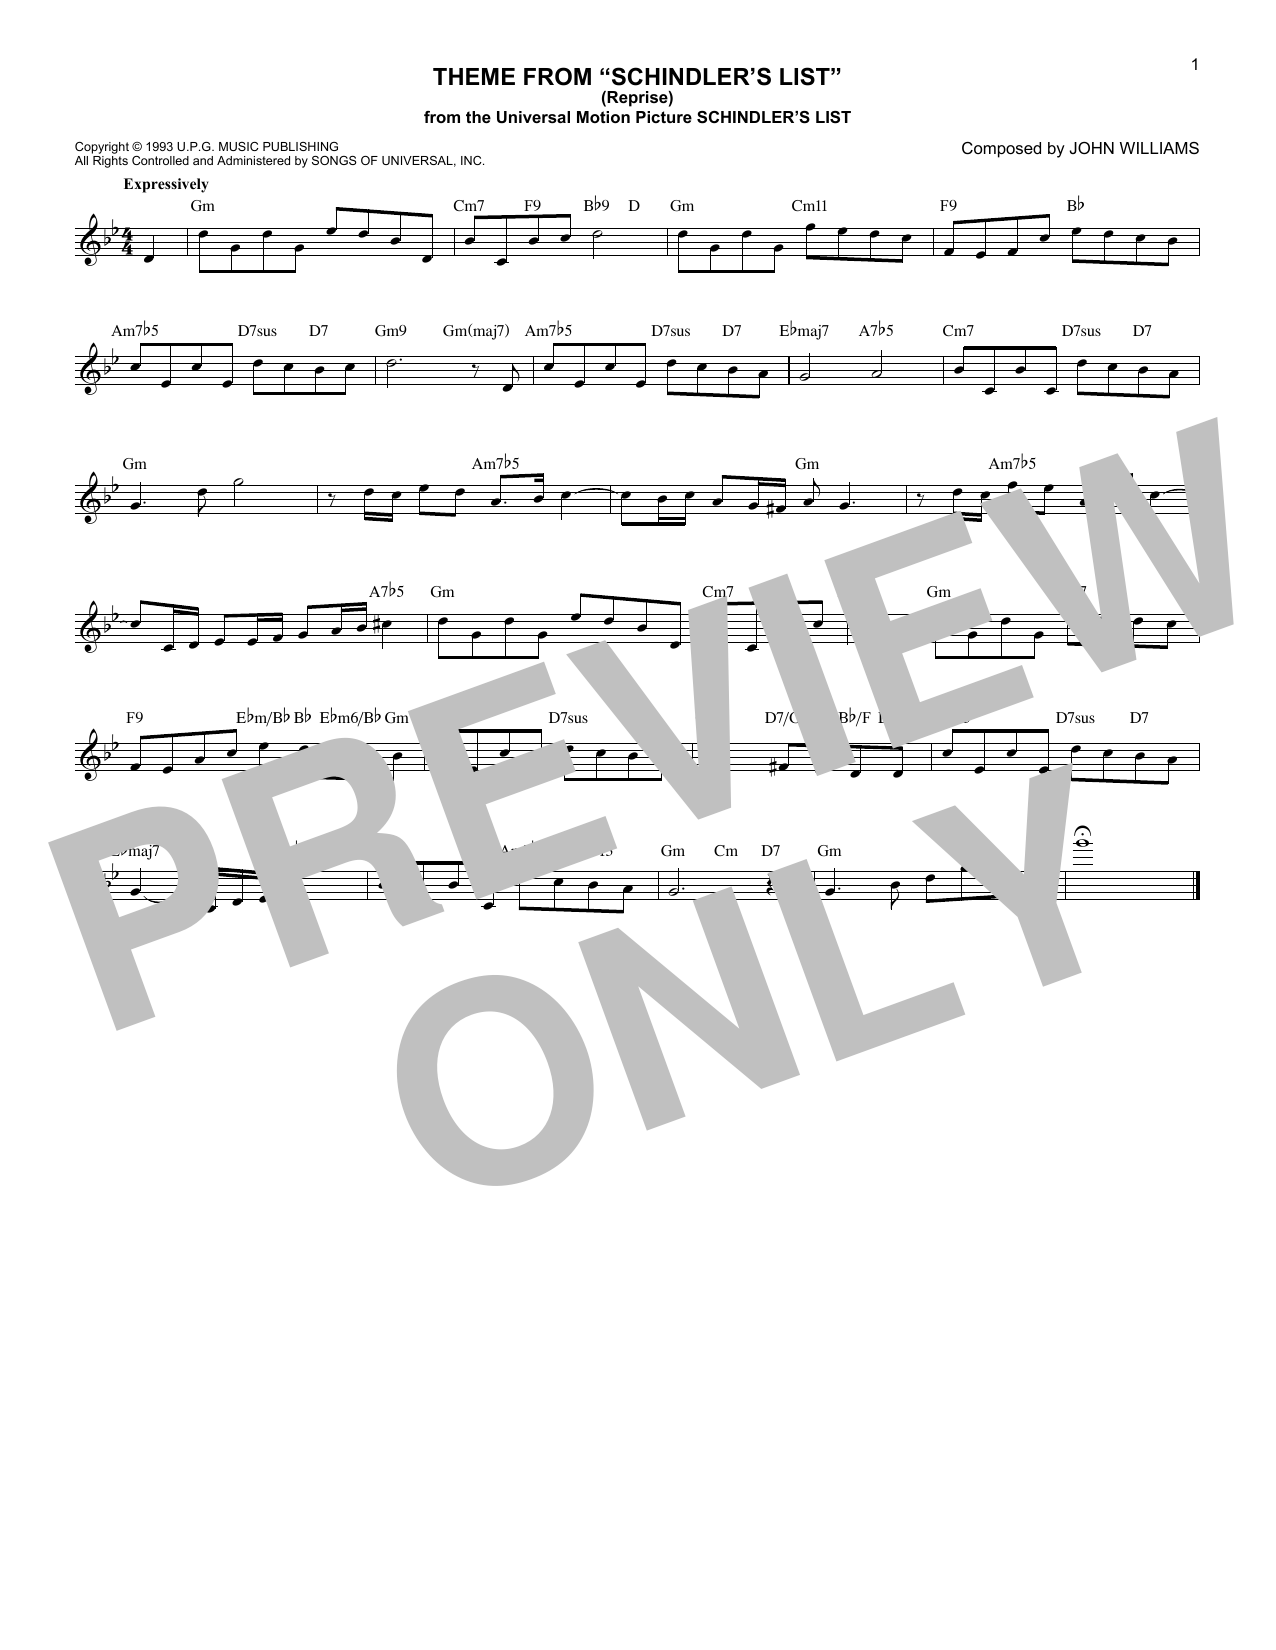 Download John Williams Theme From Schindler's List (Reprise) Sheet Music